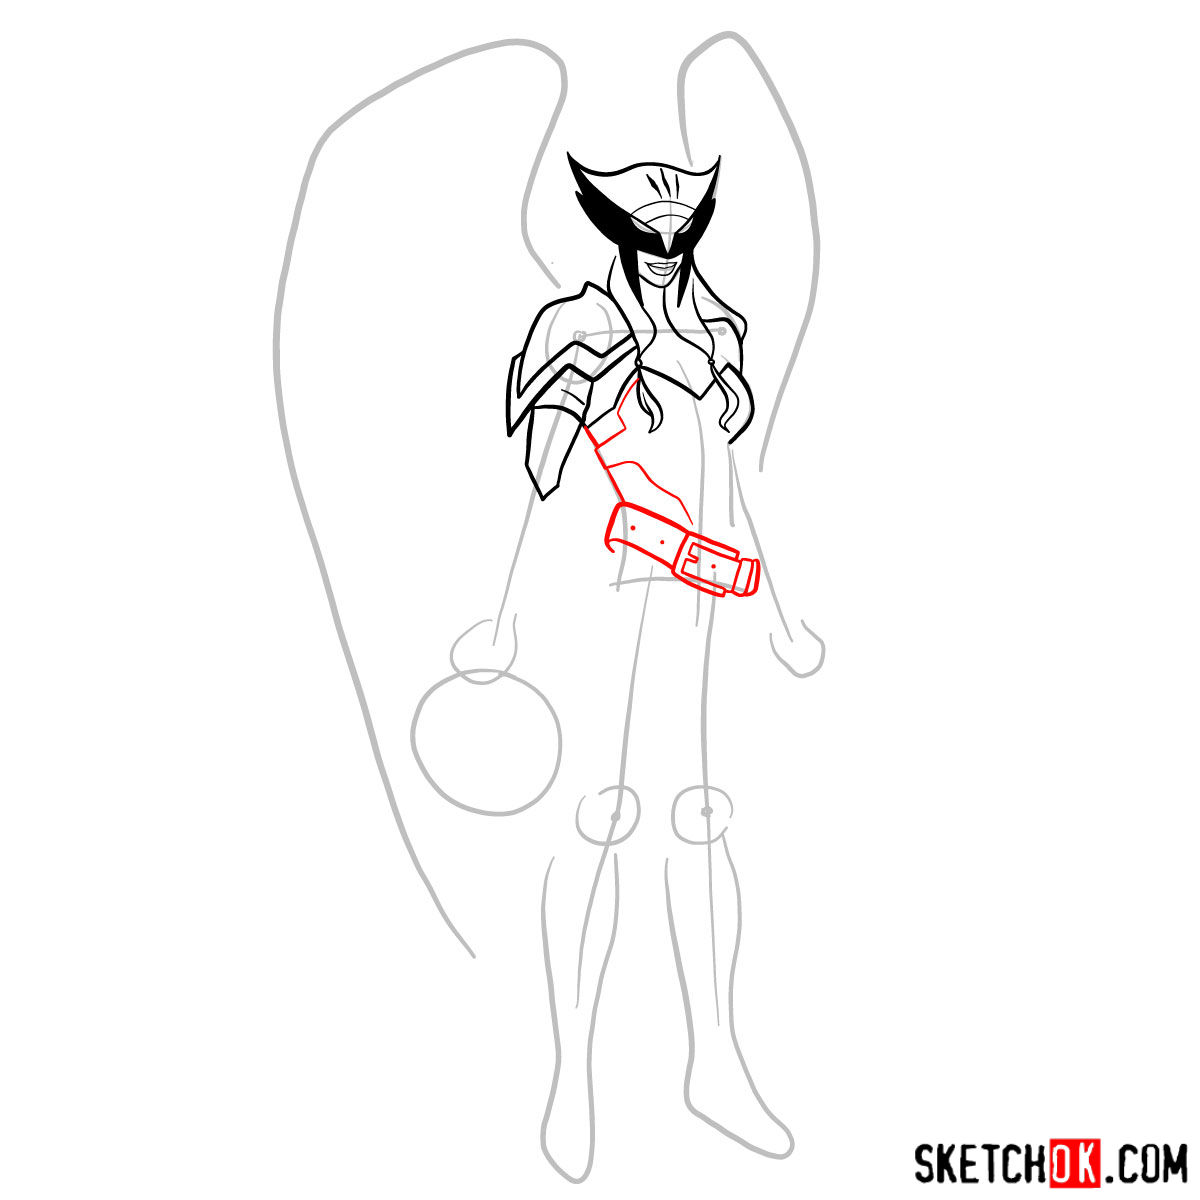 How to draw Hawkgirl DC superheroine - step 08